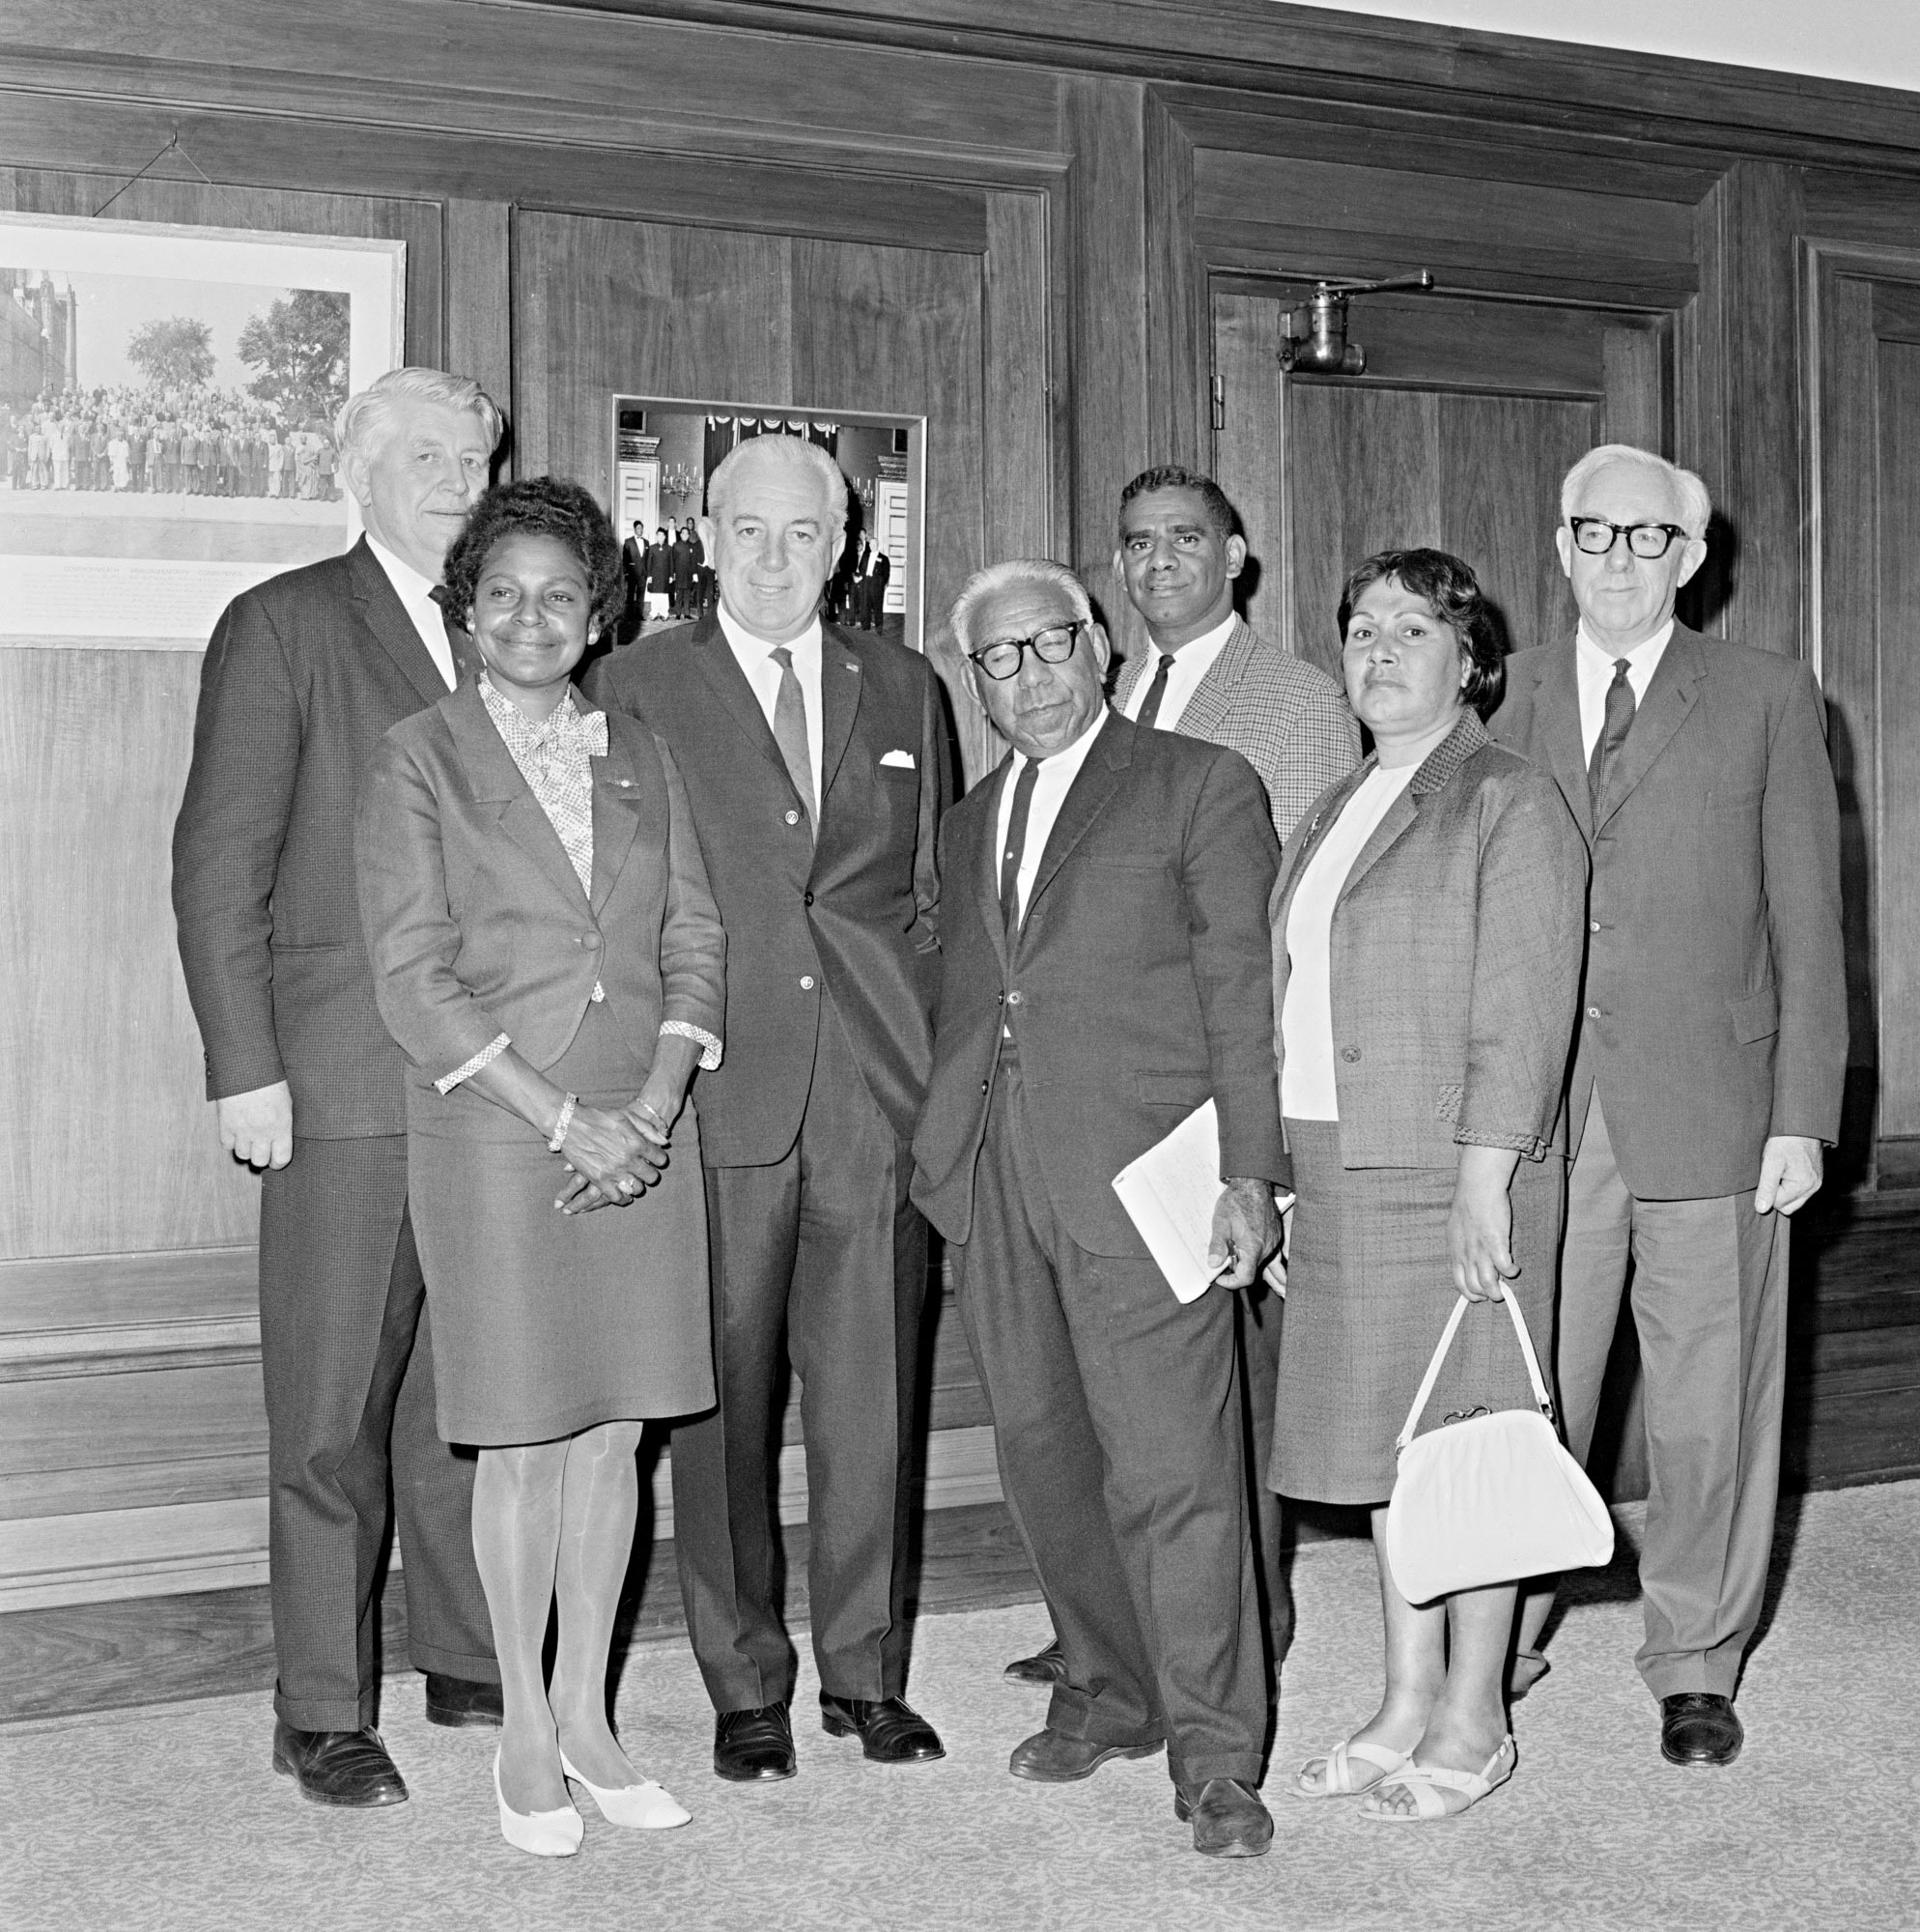 Lobbyists from the Federal Council for the Advancement of Aborigines and Torres Strait Islanders with Prime Minister Harold Holt (third from left) in February 1967.